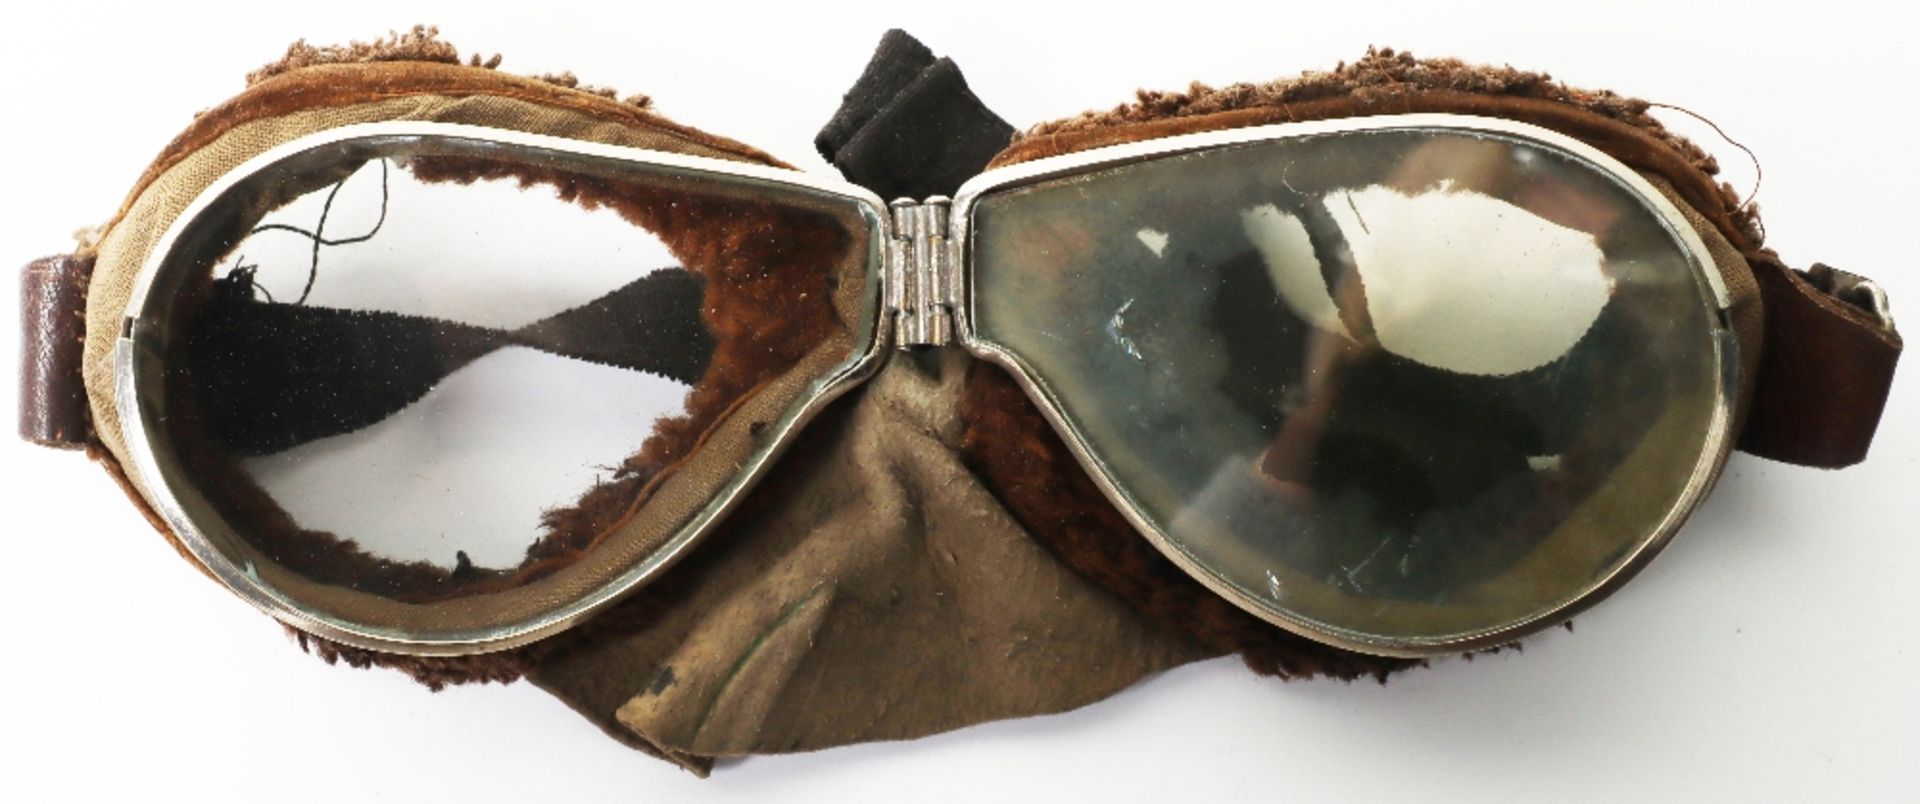 Five Pairs of Aviators Flying Goggles - Image 6 of 7